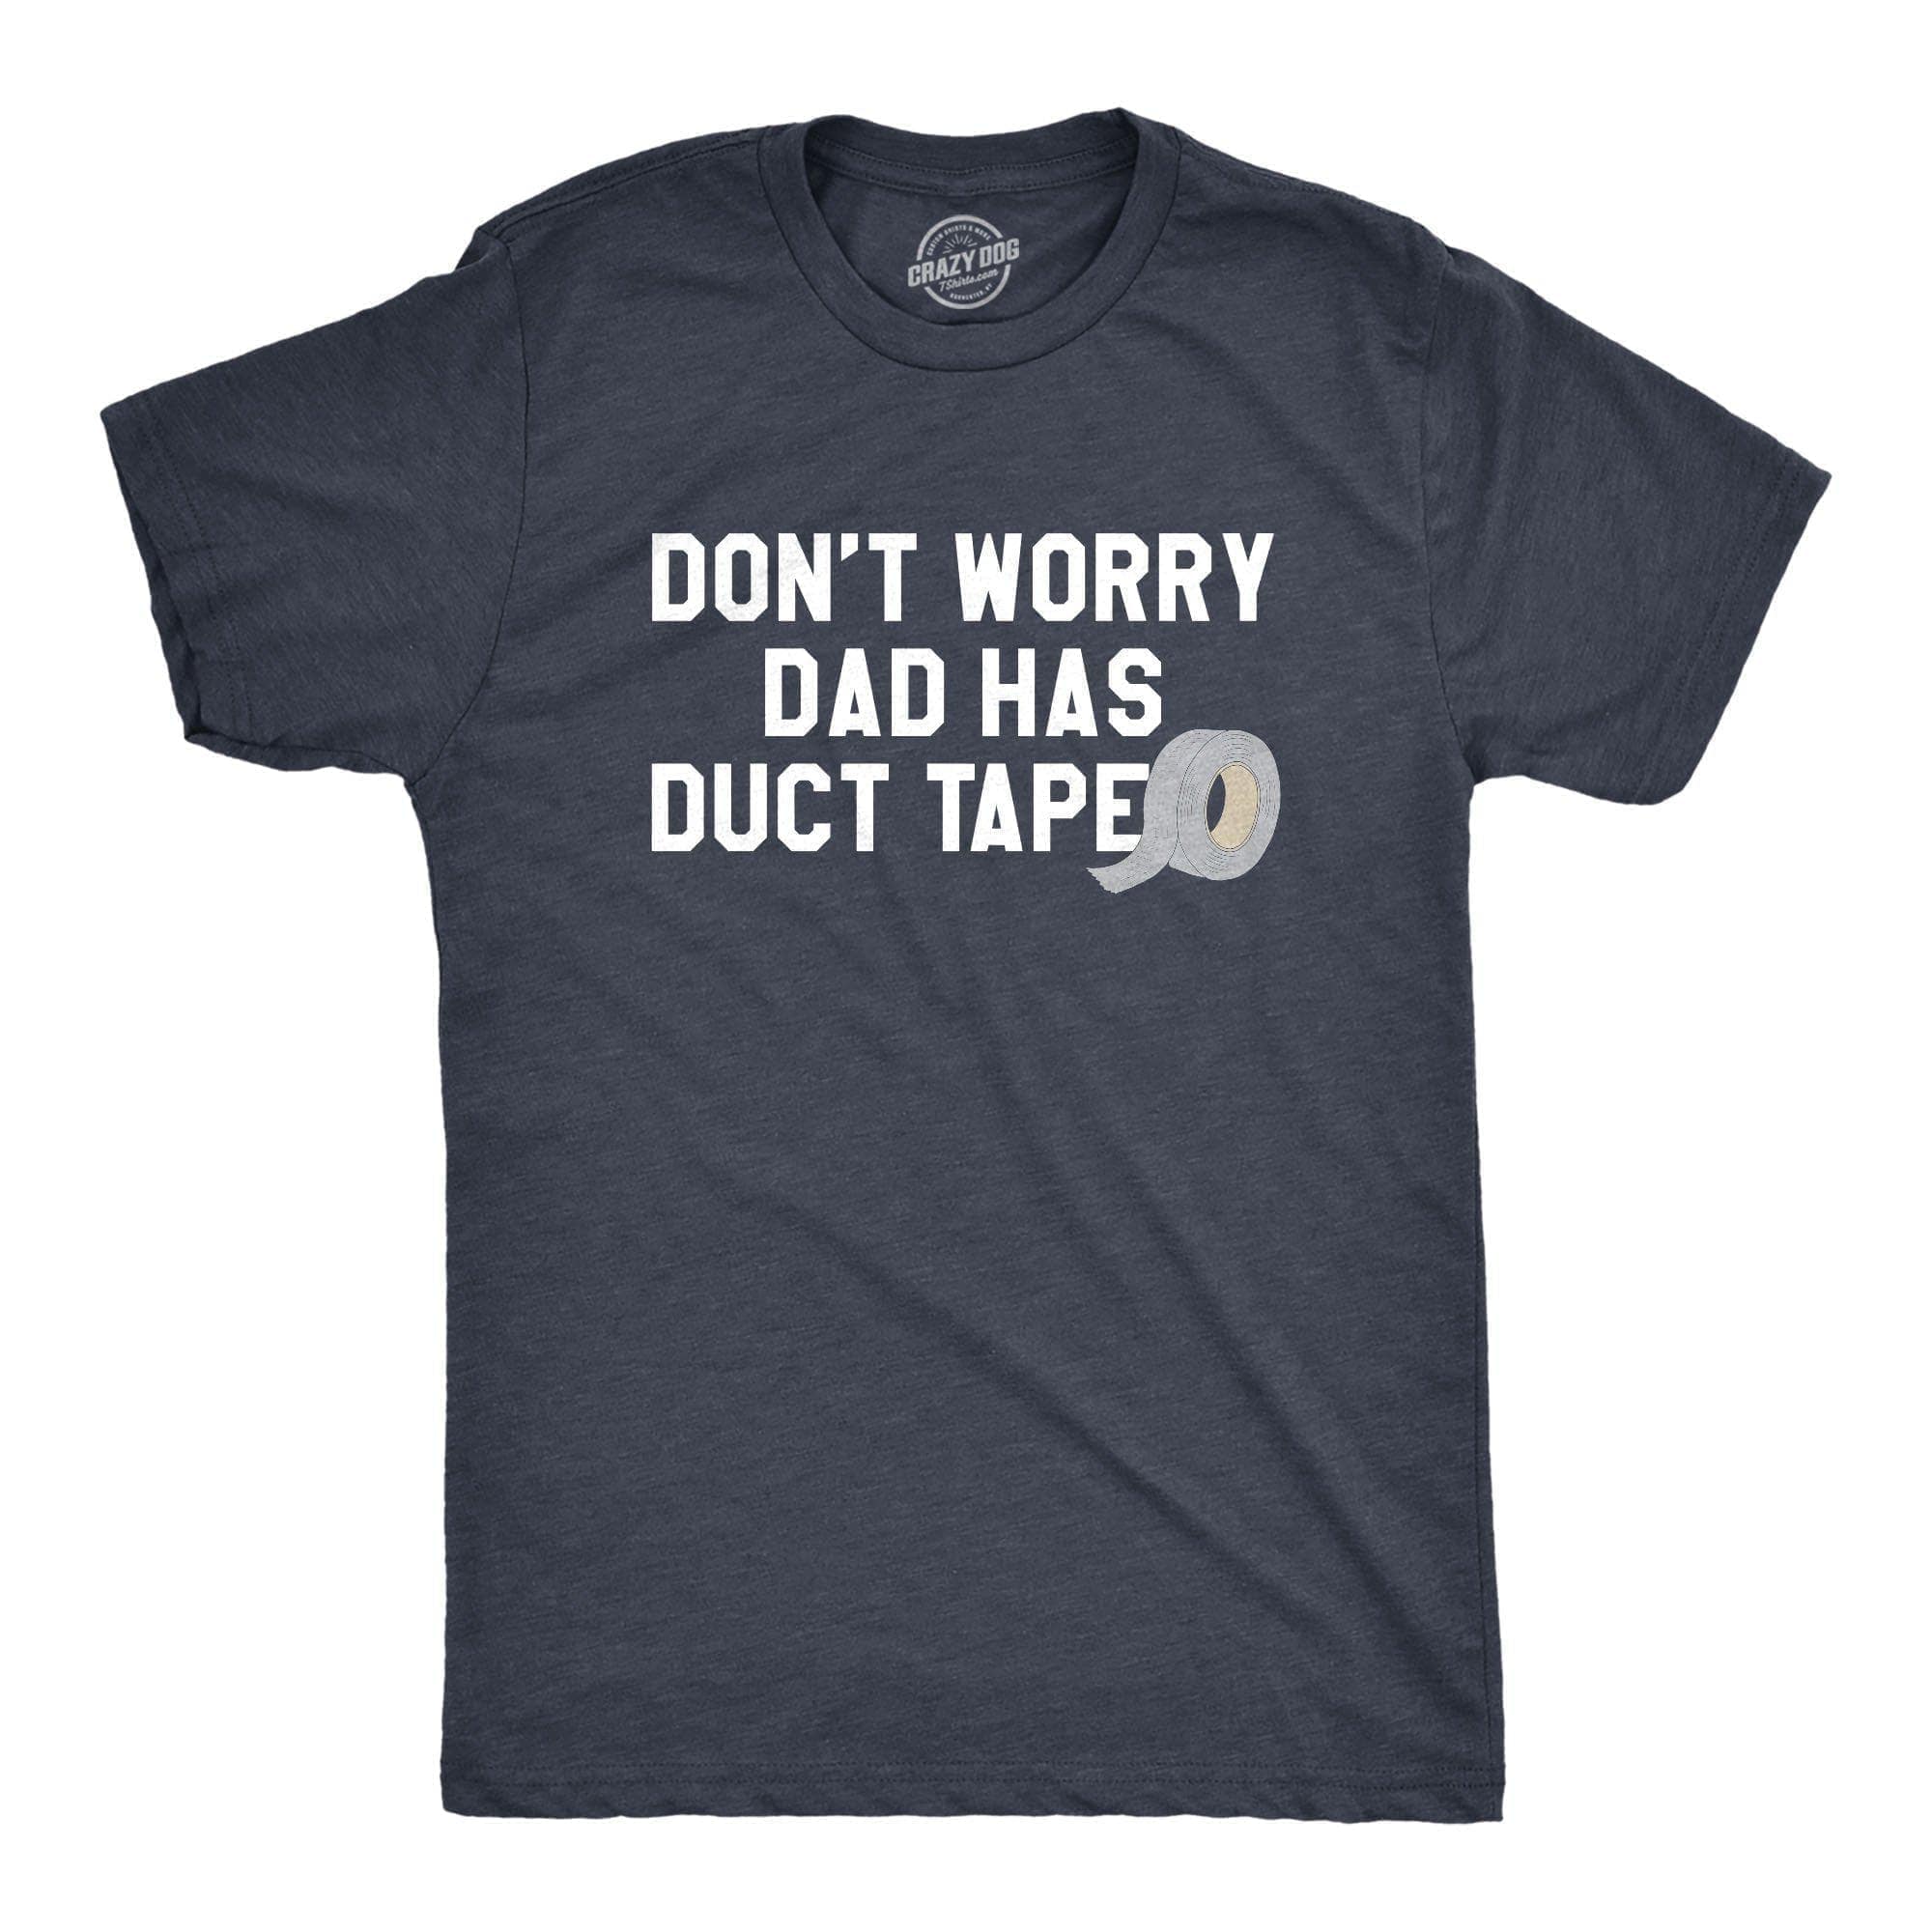 Dad Has Duct Tape Men's Tshirt  -  Crazy Dog T-Shirts